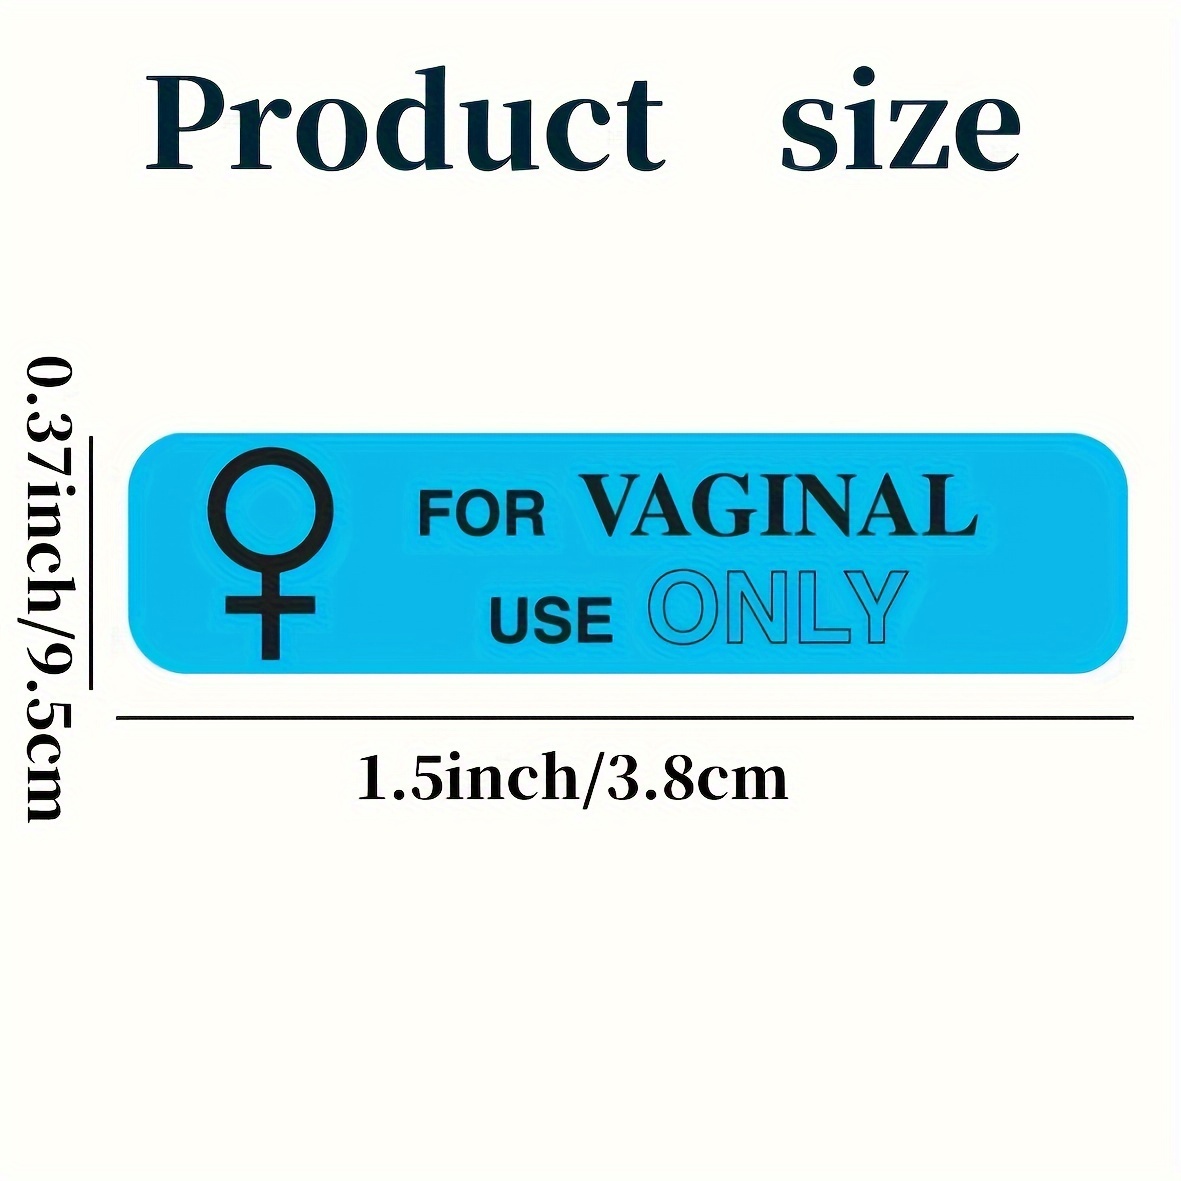 500pcs for Rectal Use Only Stickers 1.5 inches x 3/8 inches